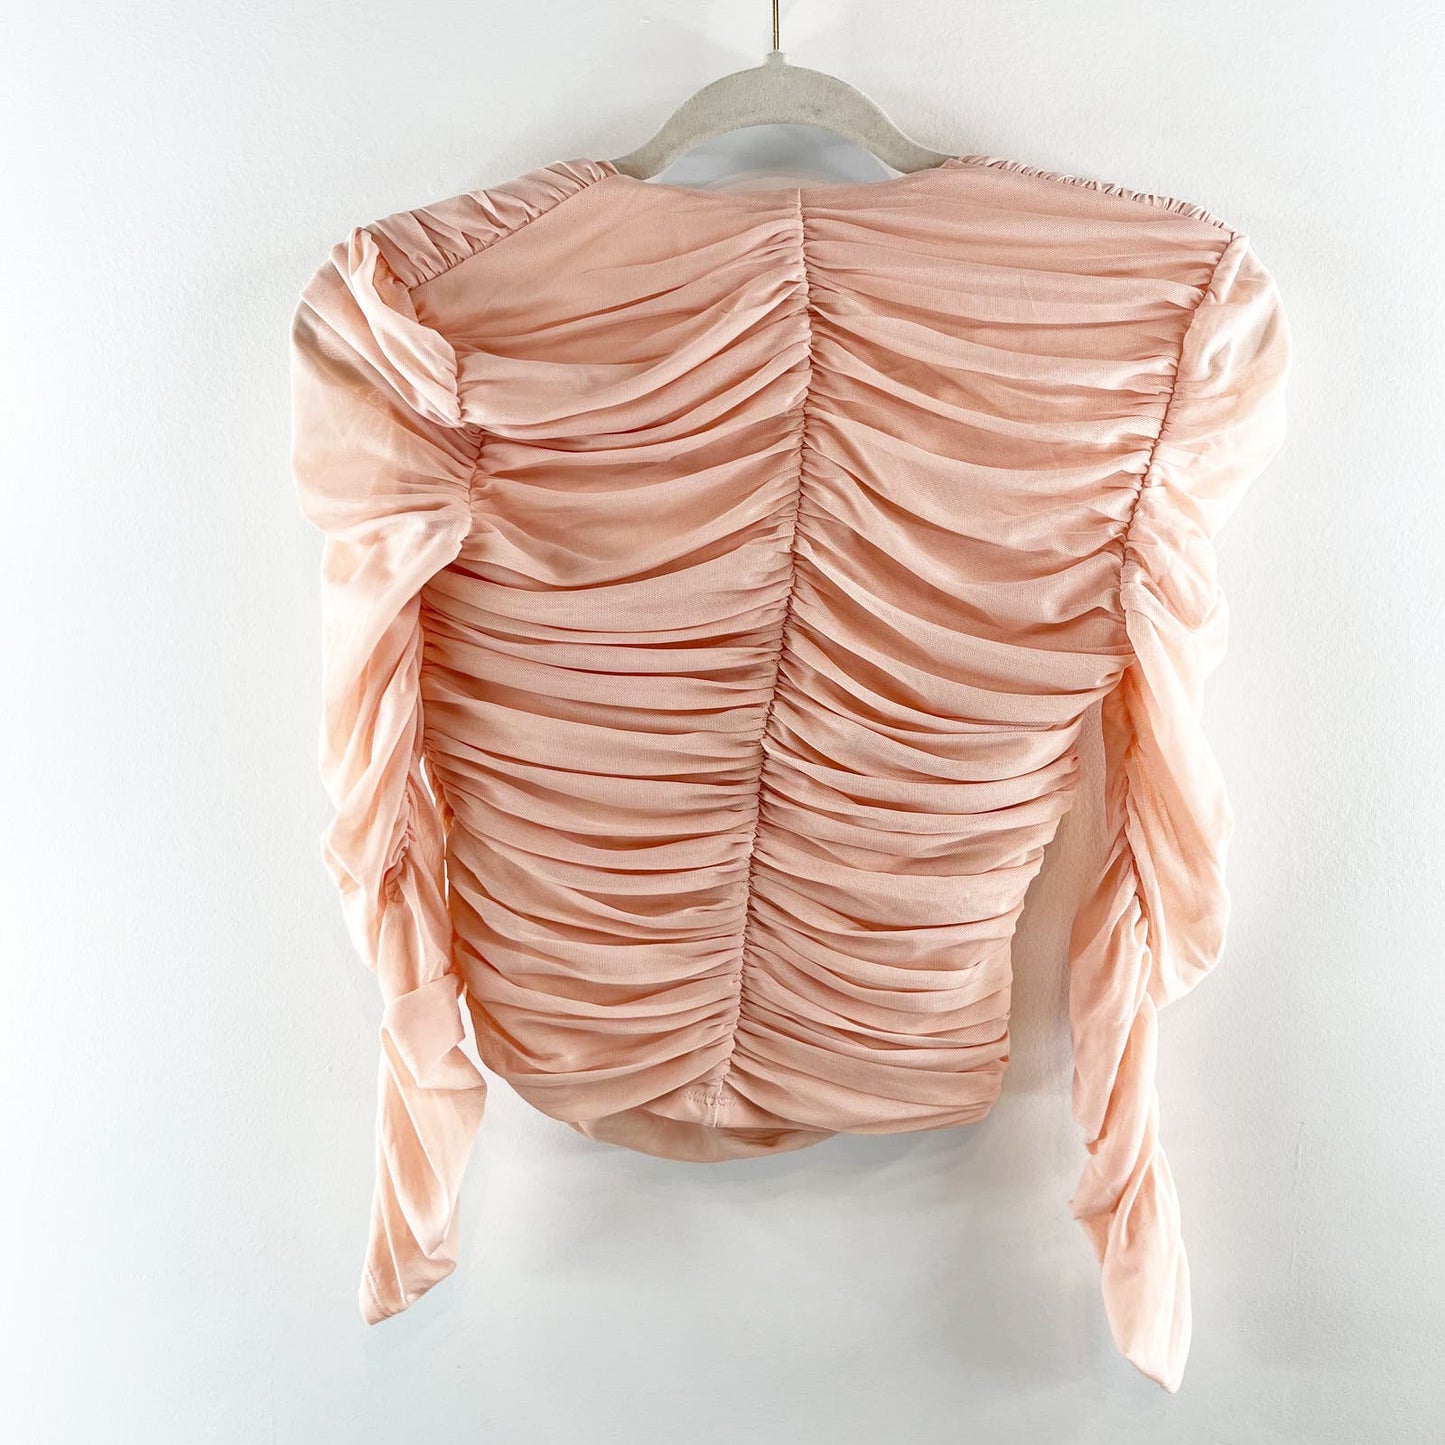 Express Body Contour Sheer Sleeve Ruched Corset Style Top Baby Pink Small